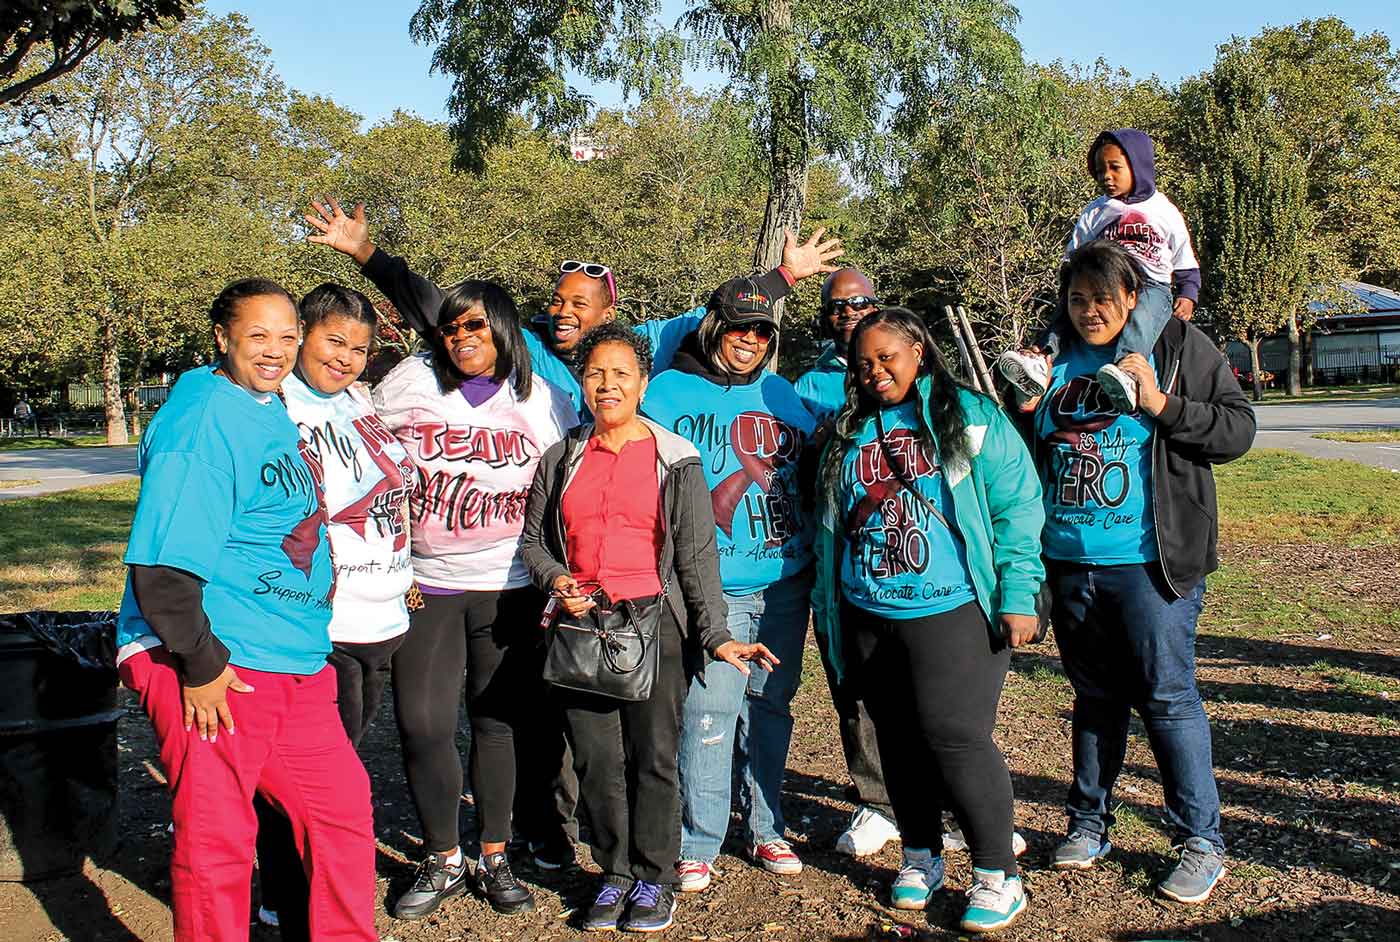 Walk for myeloma with mostly African American participants